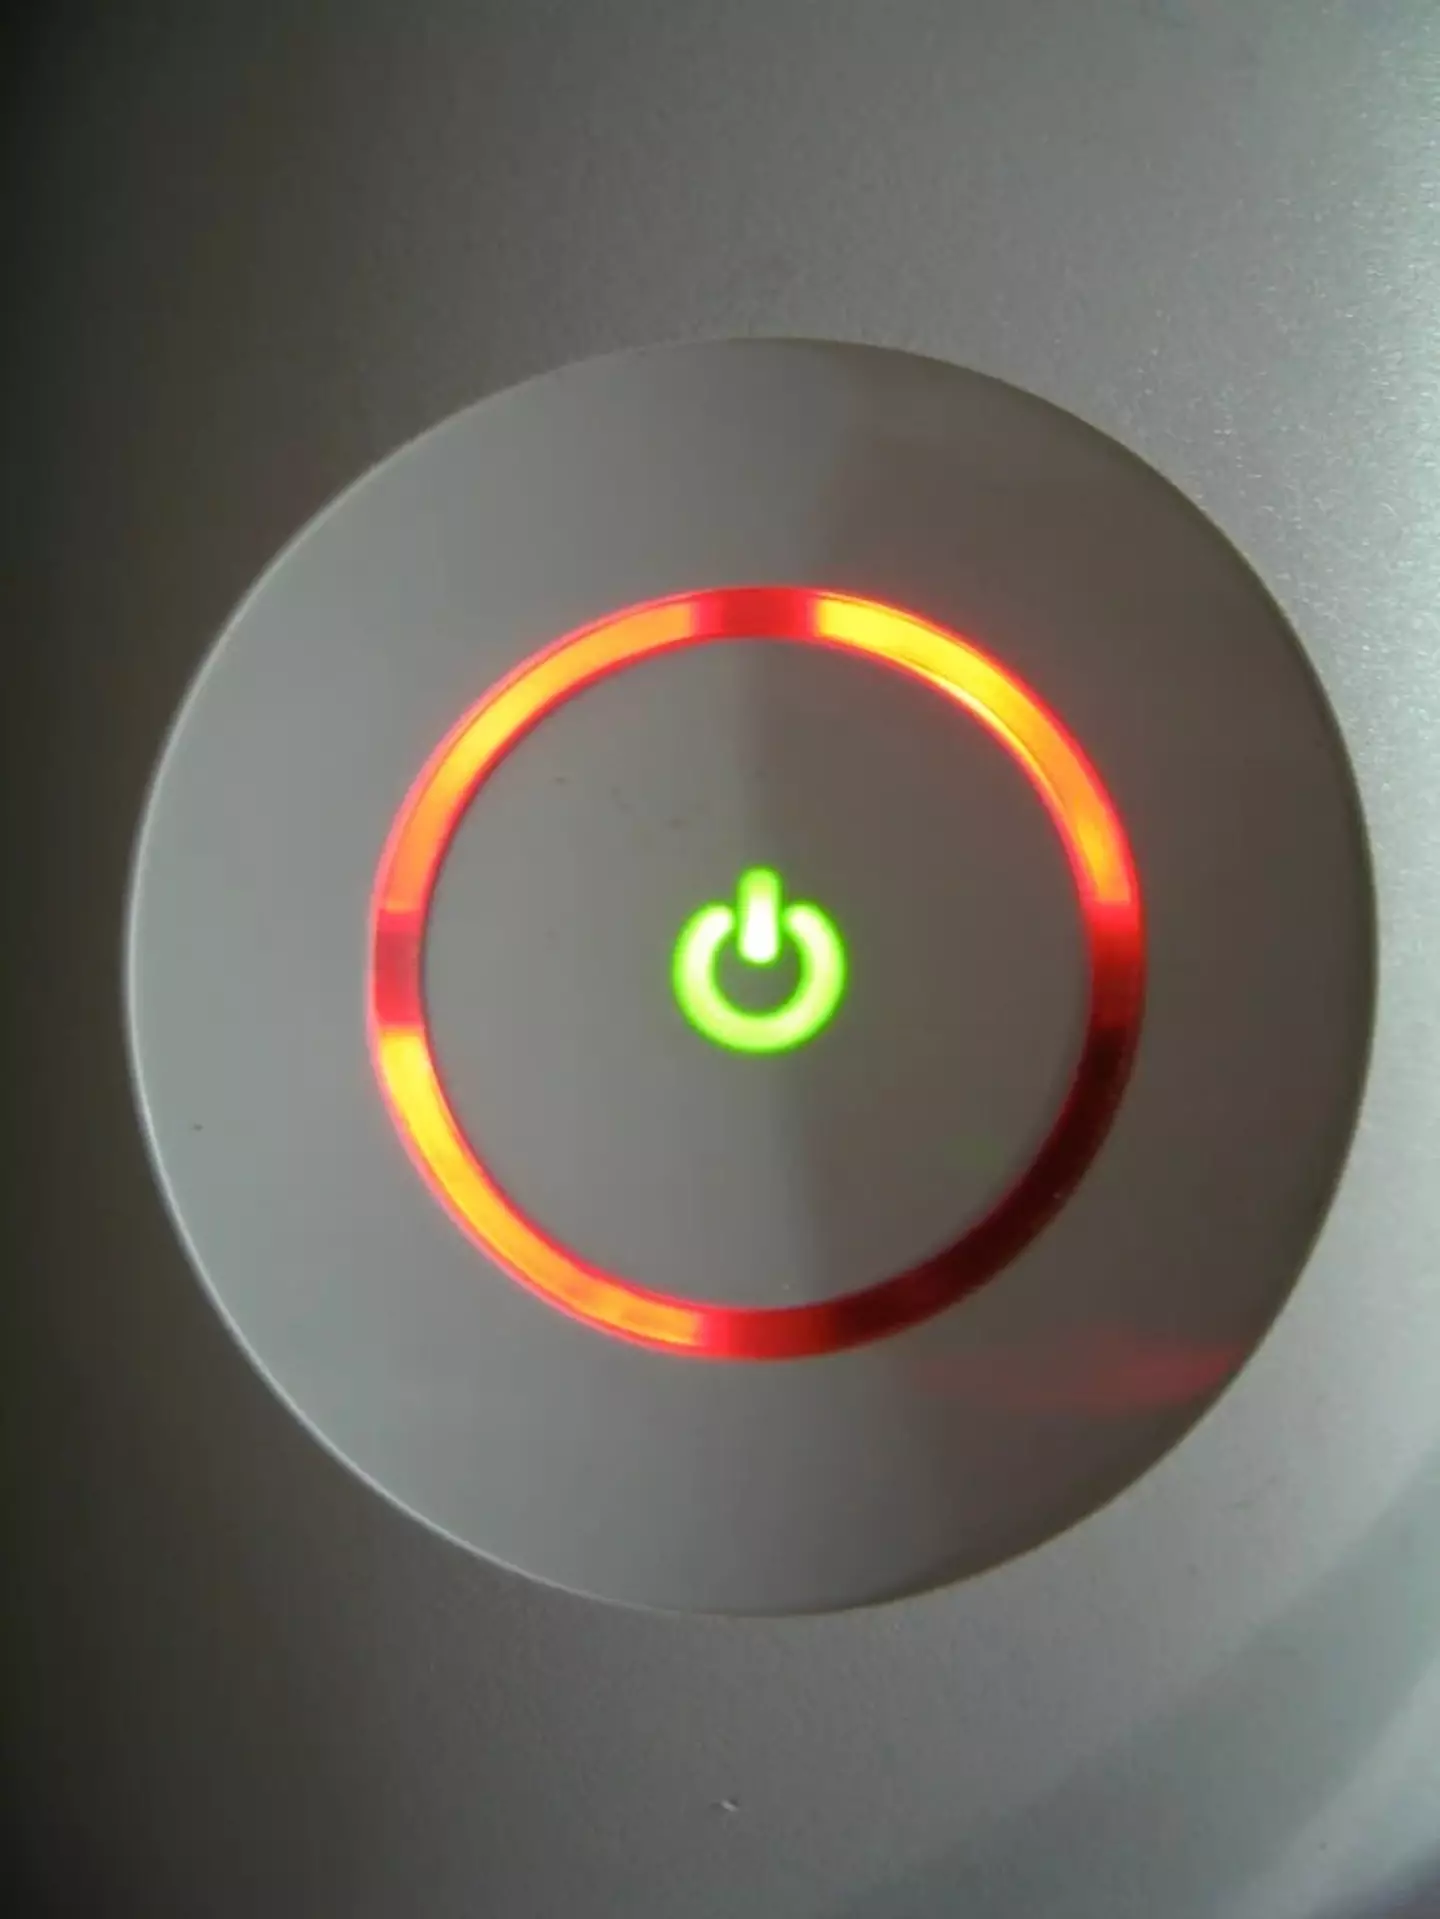 The dreaded red ring of death used to plague Xbox 360 users.